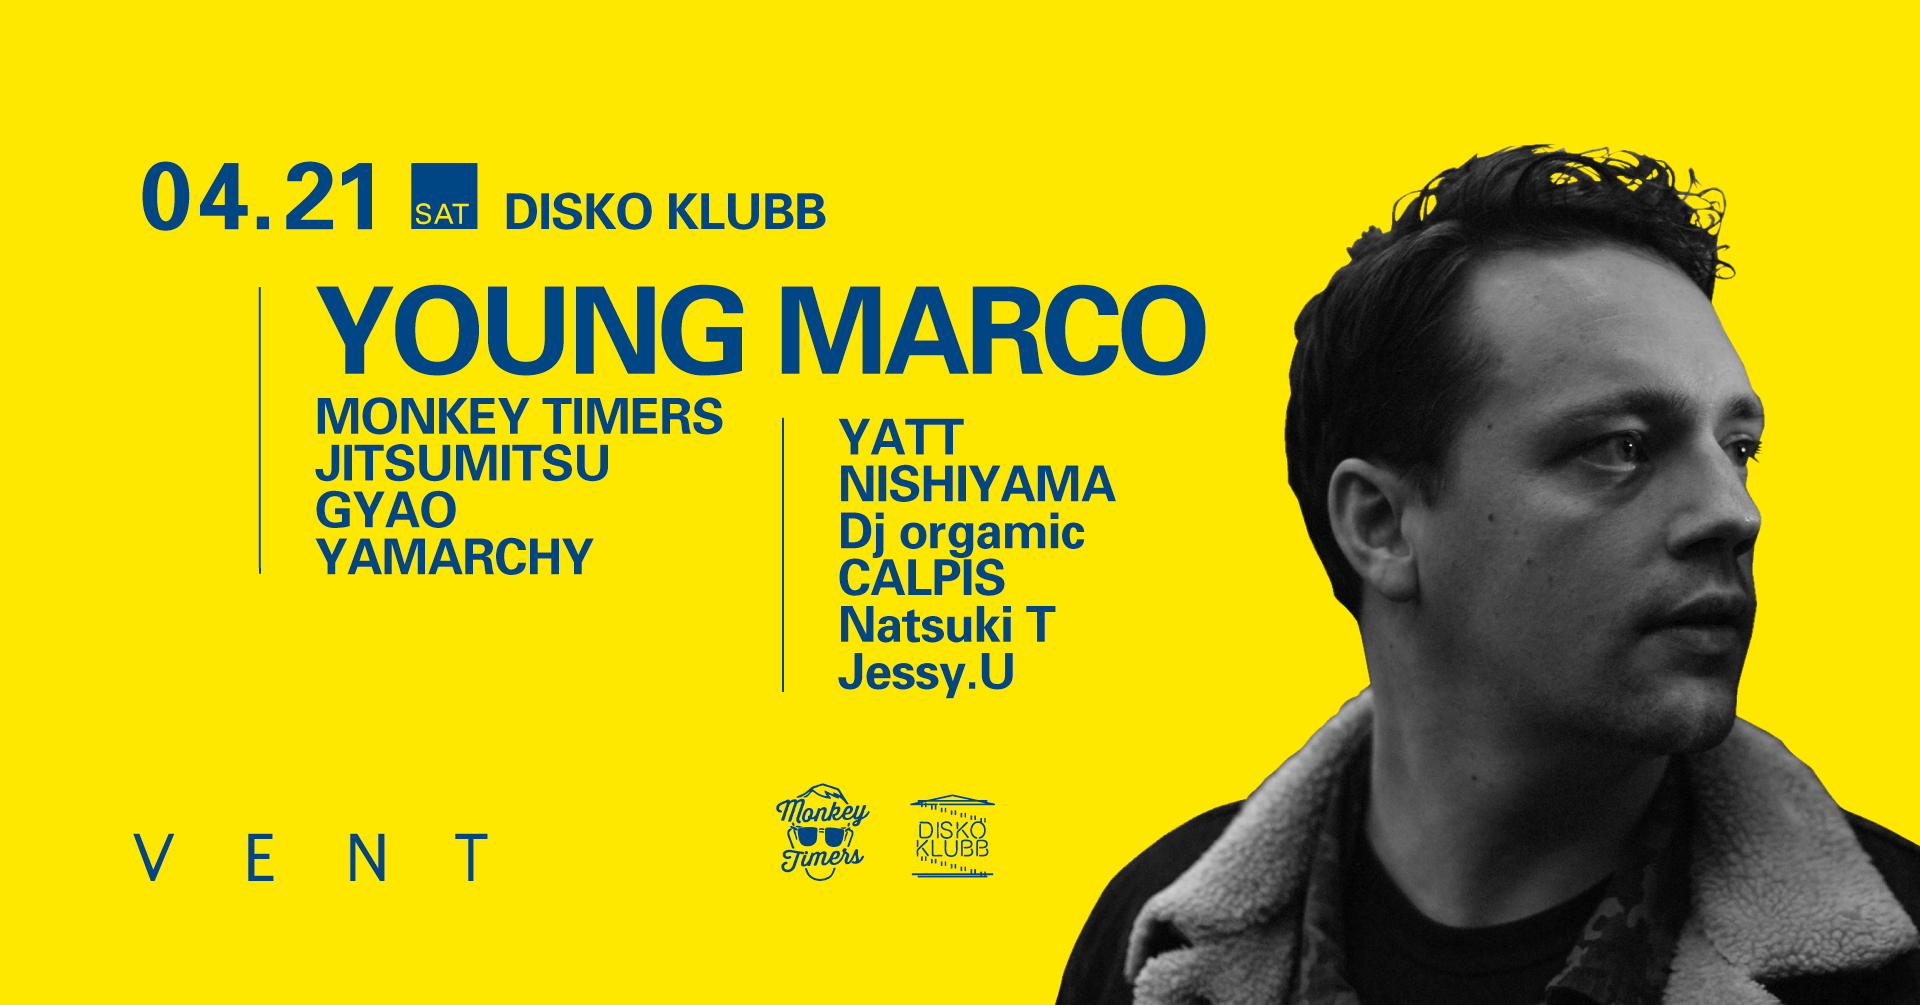  Young Marco at DISKO KLUBB